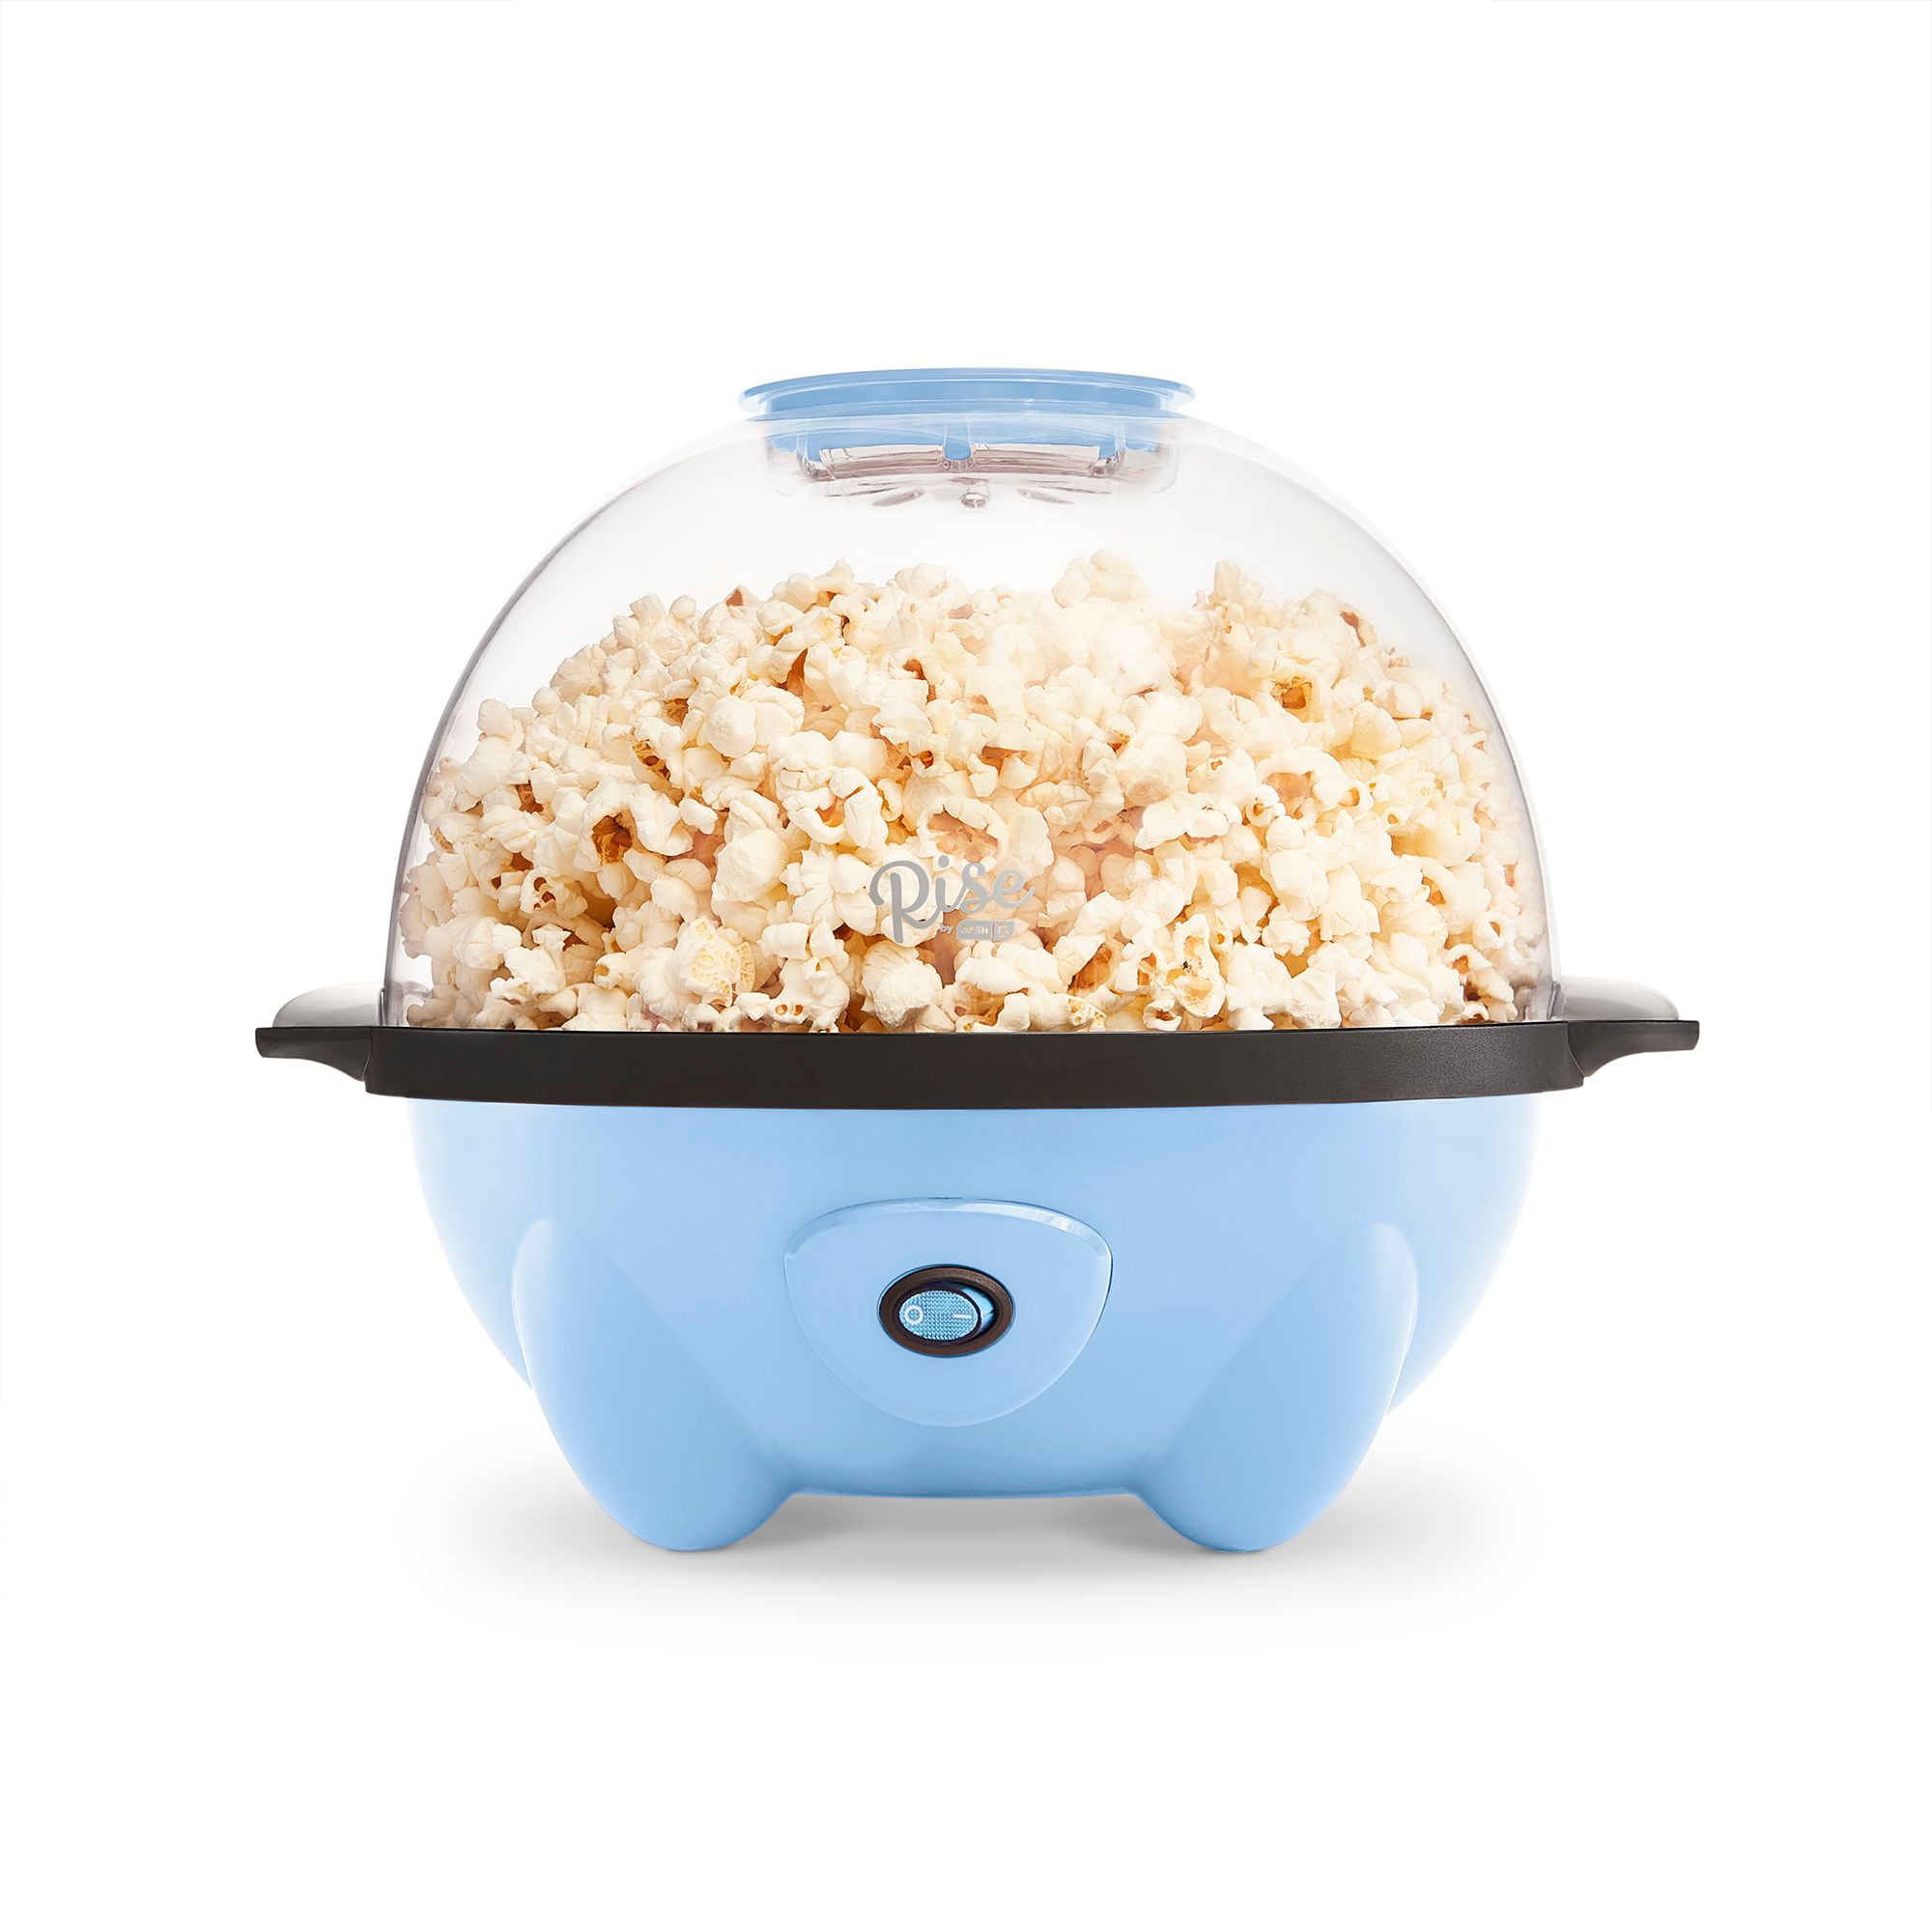 Rise by Dash Stirring Popcorn Popper… . . Review is now up on our webs, Pop  Corn